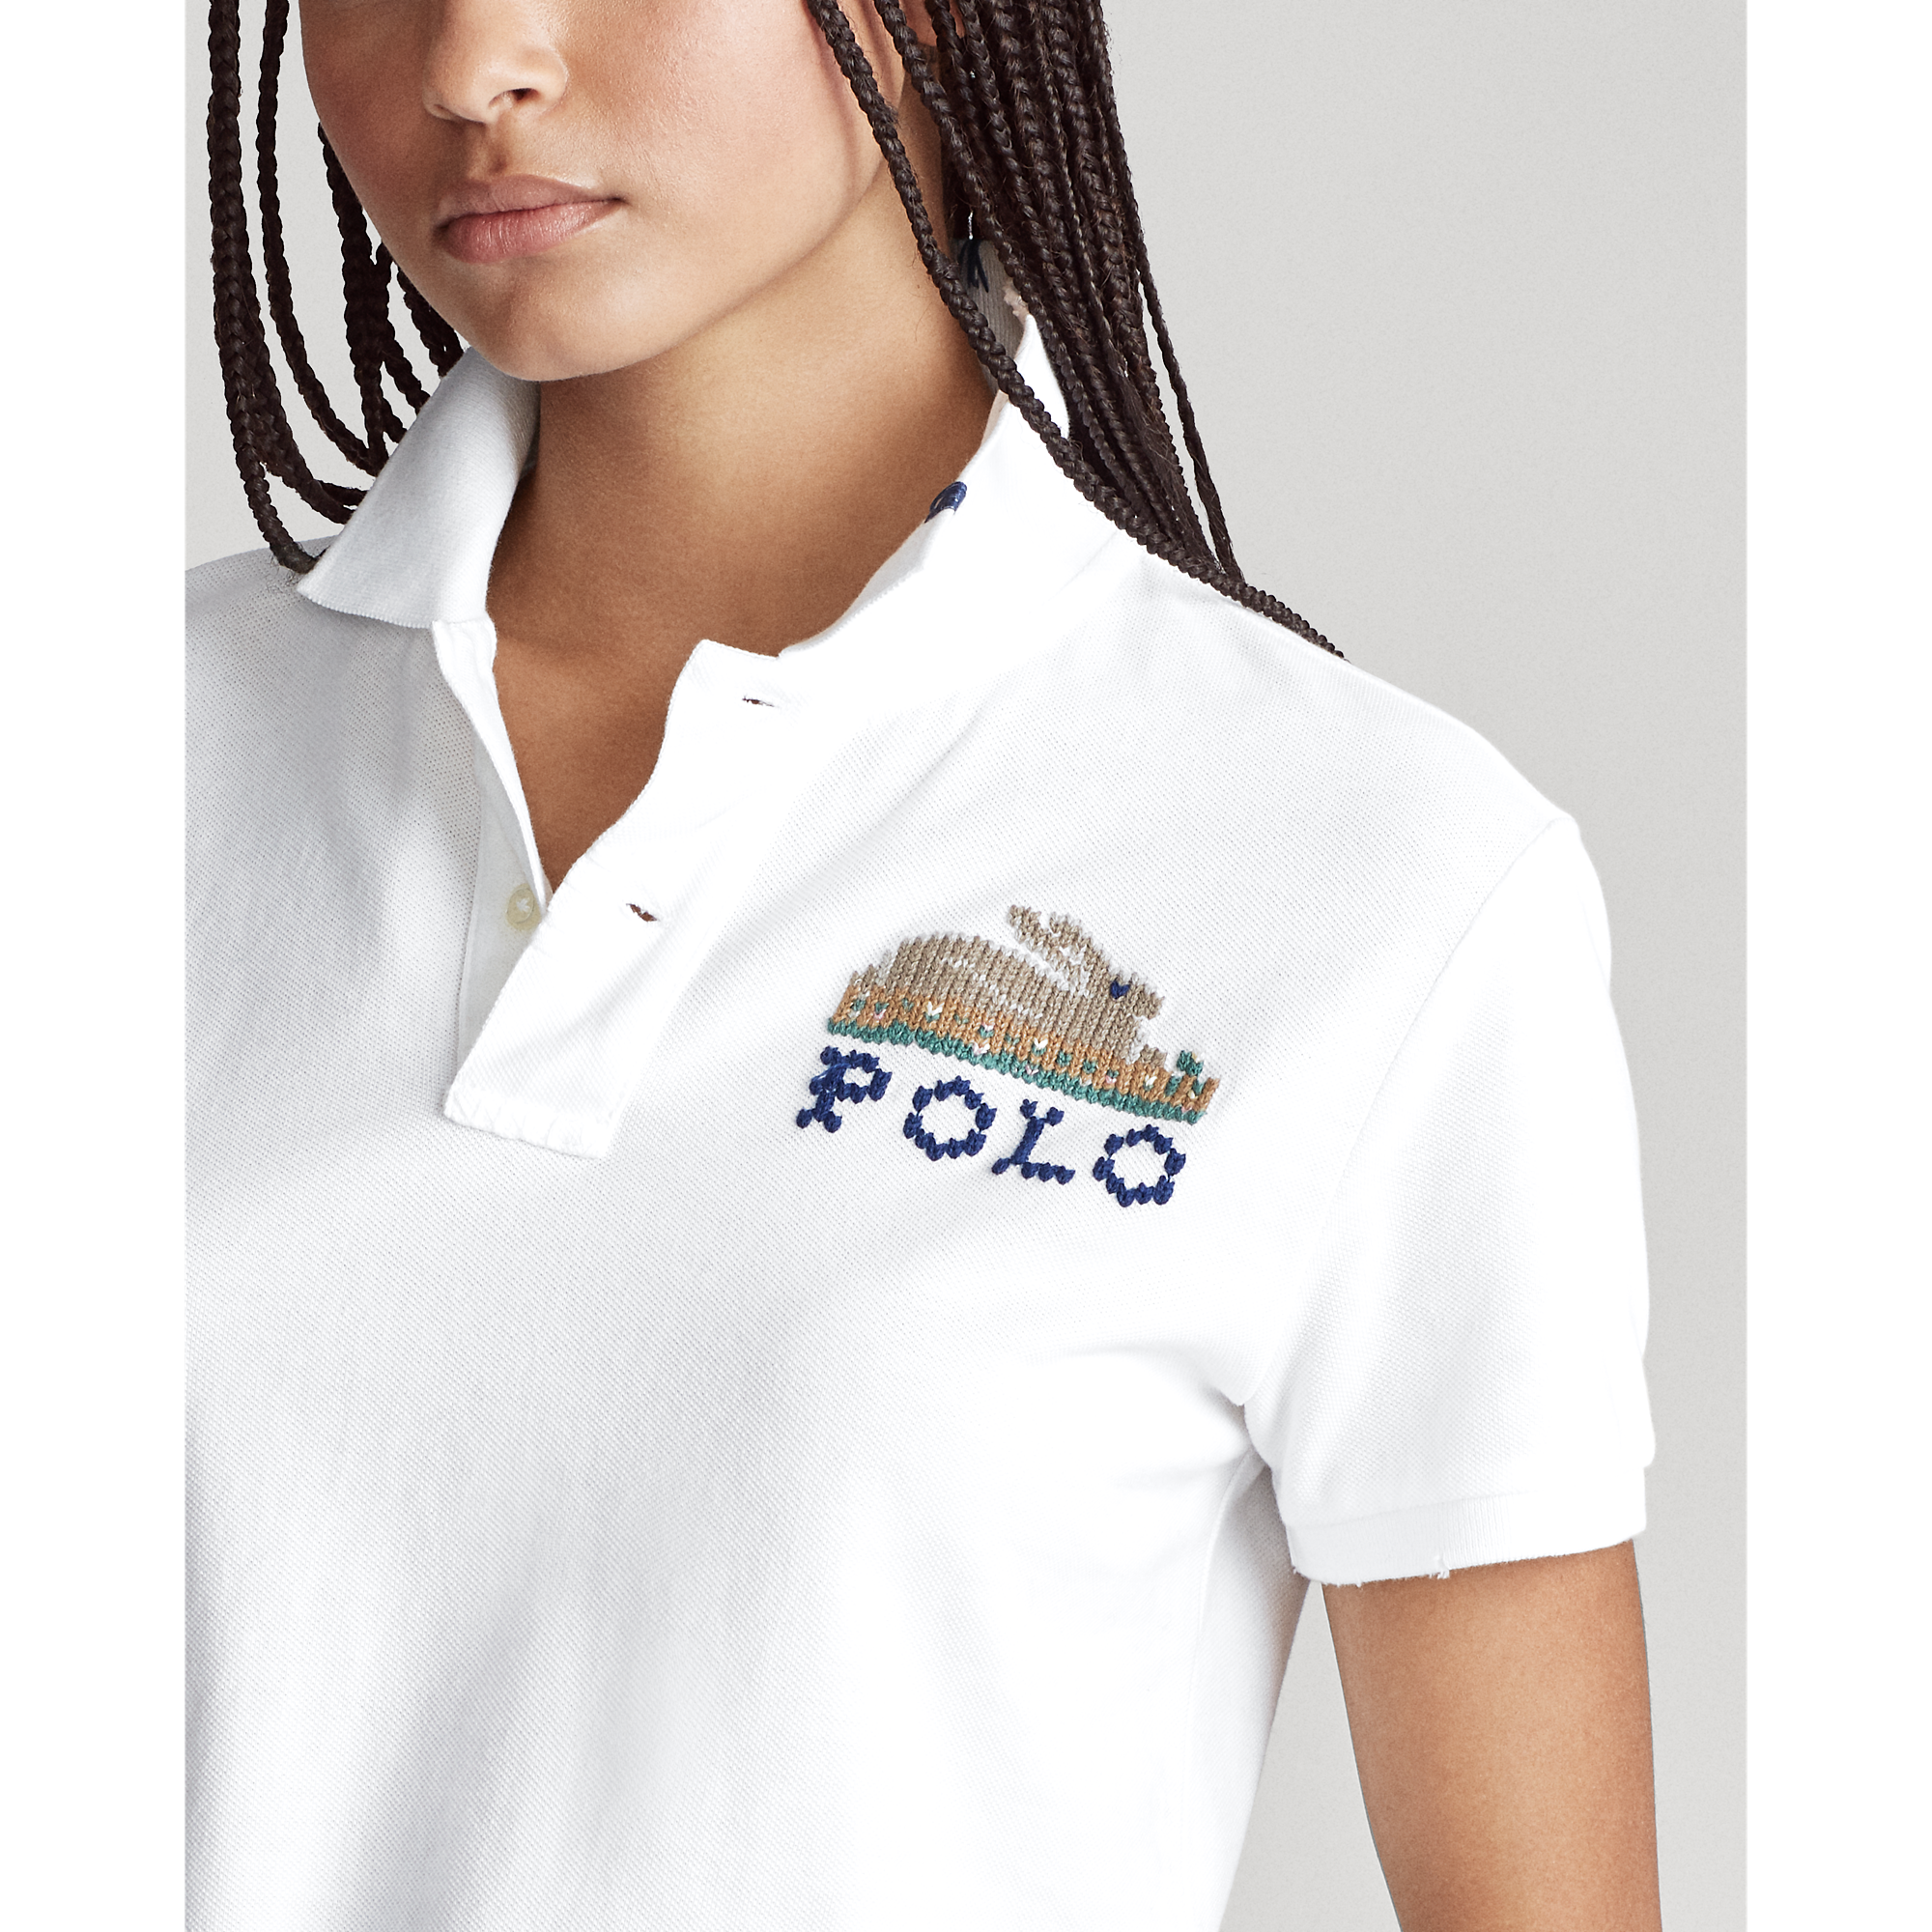 Ralph Lauren Classic Fit Embroidered Polo. 5